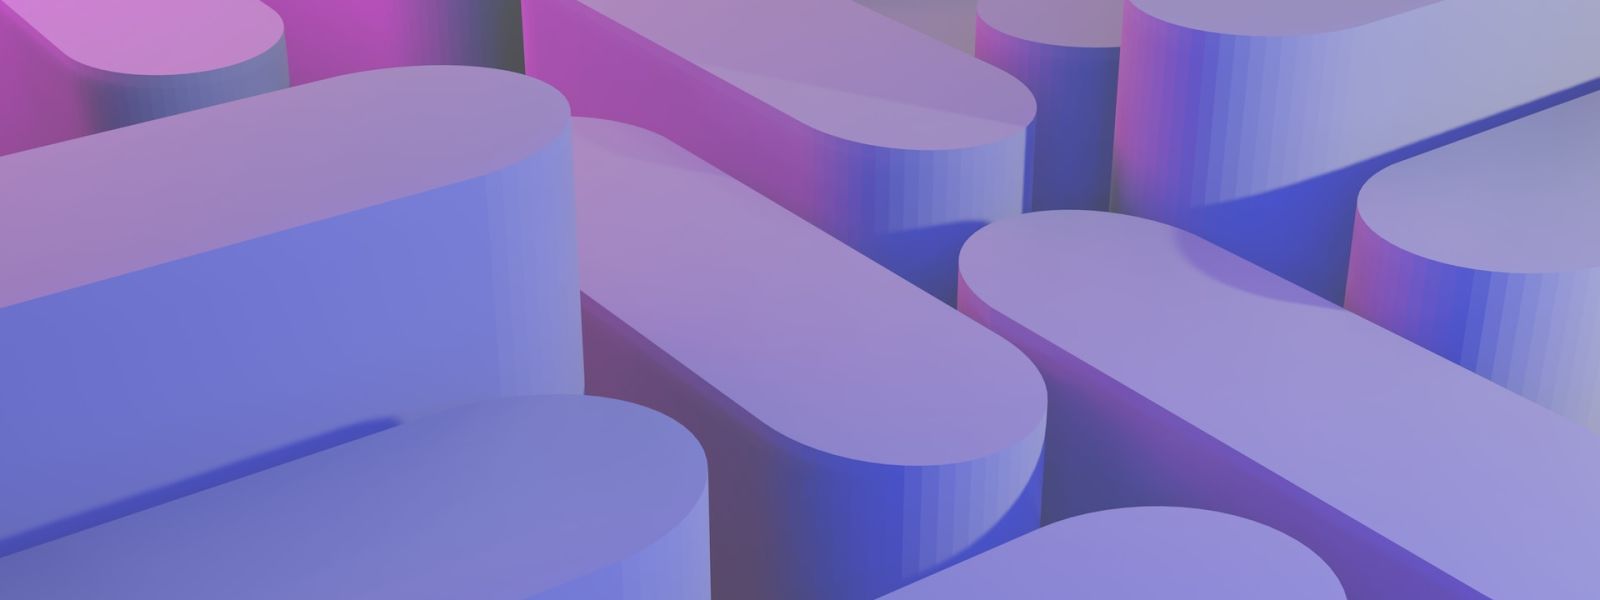 Accounting technology trends to watch out for (and how to use them to your advantage): a 3D render of pink and purple shapes that fit nicely together.